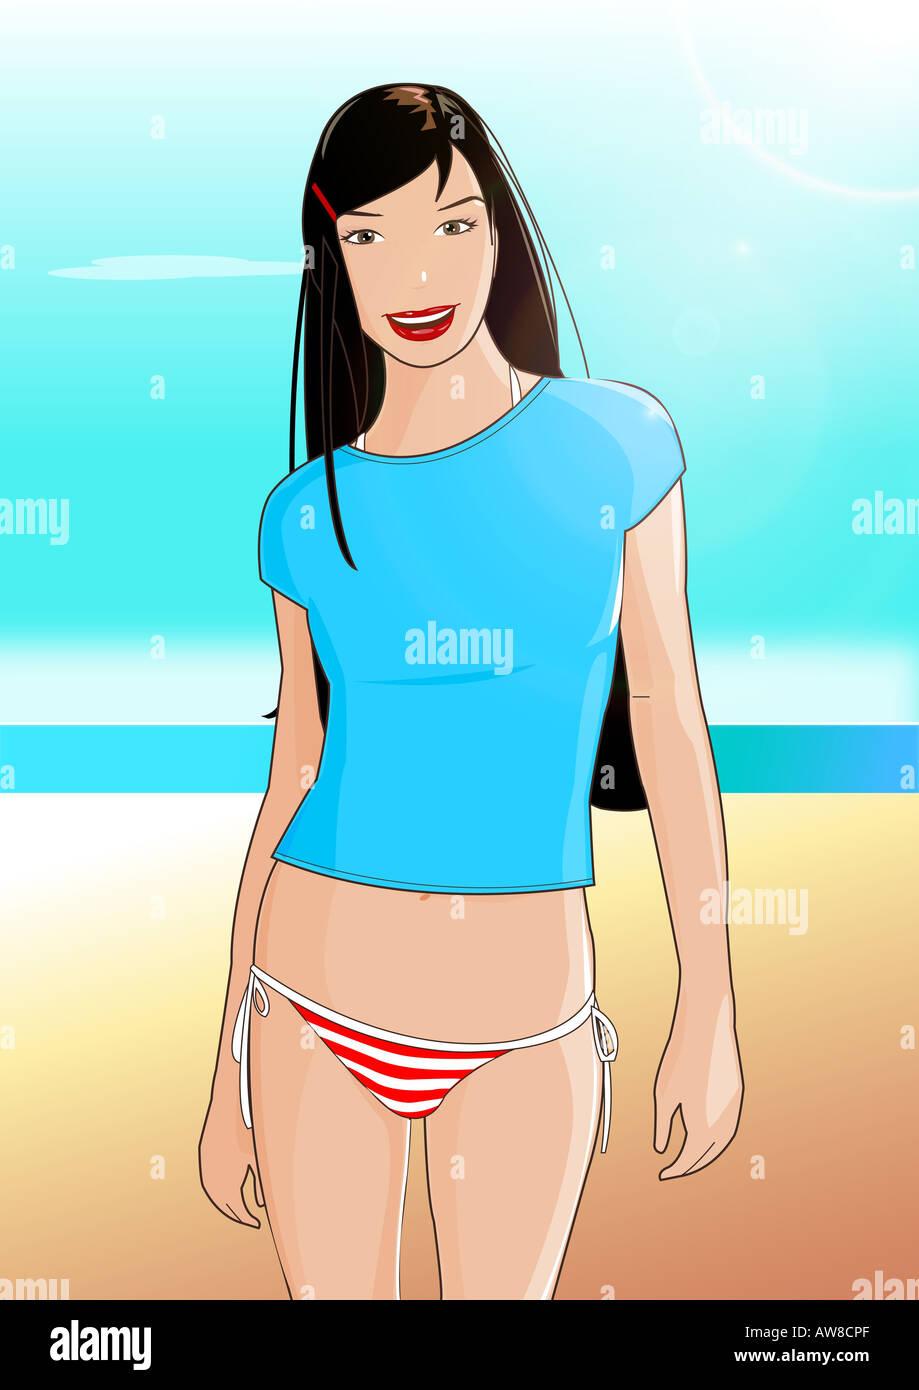 Young woman on beach with T-shirt and bikini bottoms Stock Photo